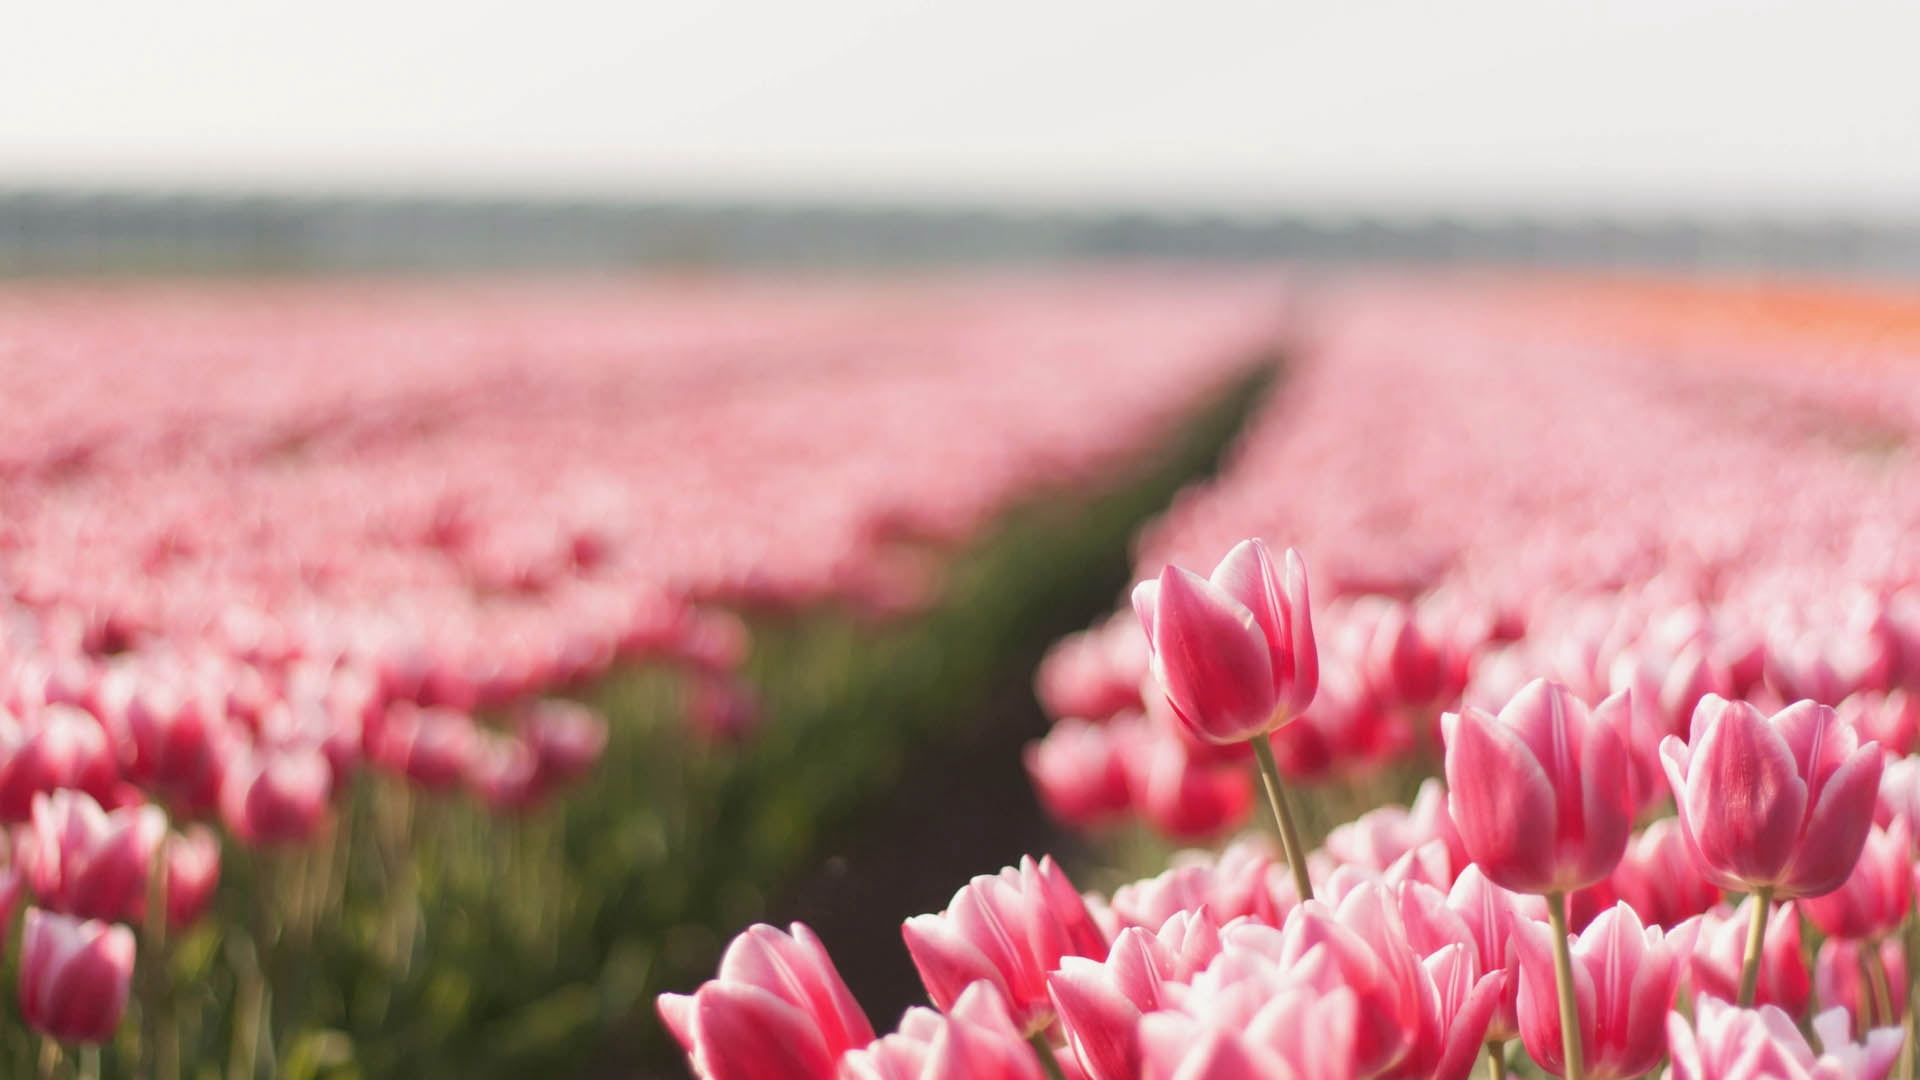 pink flower lot, tulips, field, flowers, plant, striped, nature